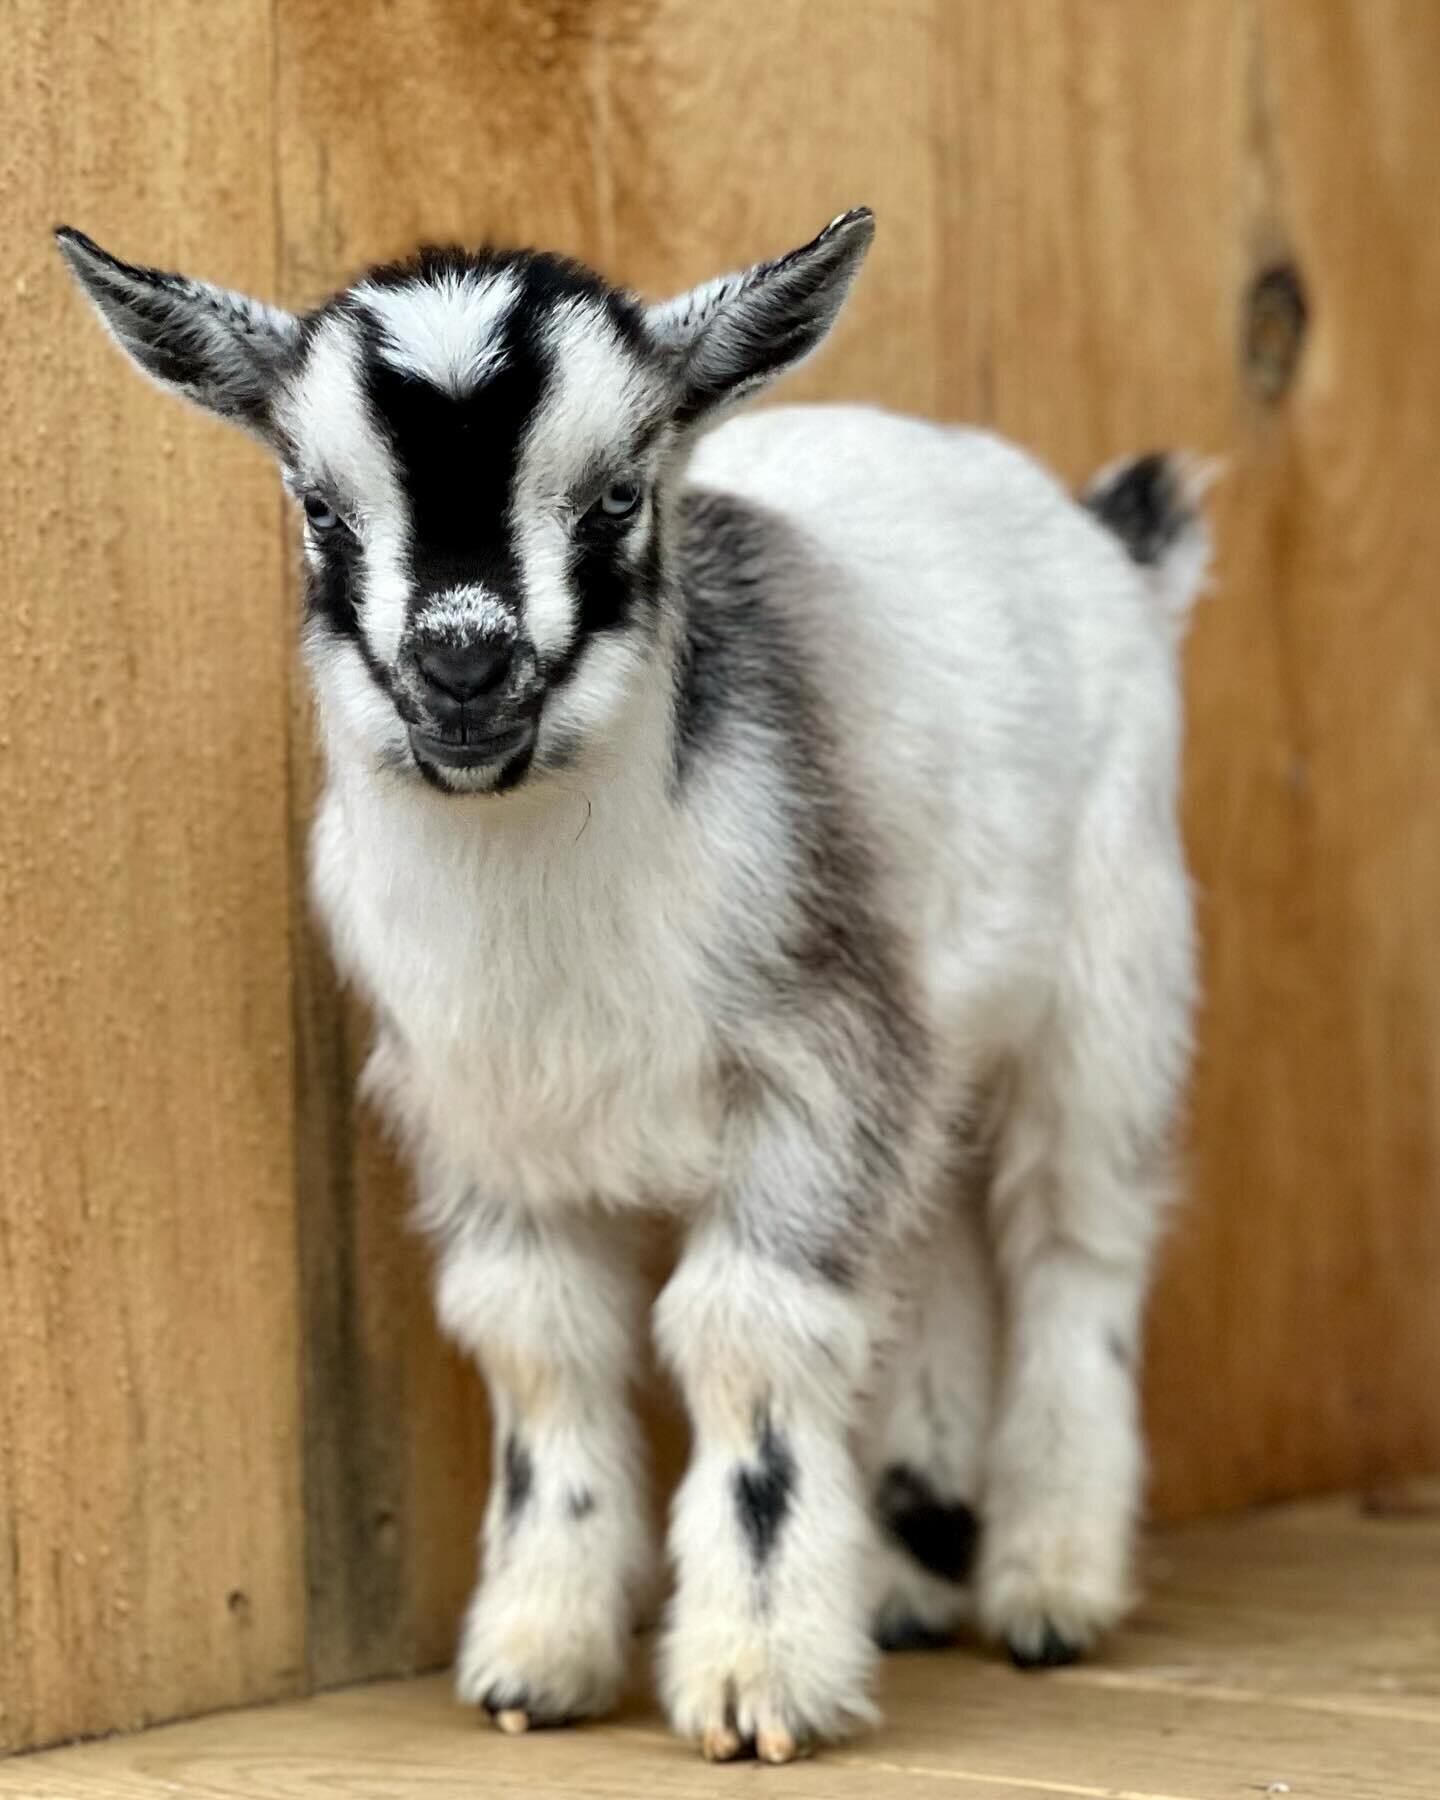 Happy Monday! I wanted to share a sneak peak at one of our new therapy goats! I&rsquo;m looking forward to introducing this little guy to clients in the spring! #goattherapy #goatsofinstagram #mentalhealth #experientaltherapy #adventuretheraoy